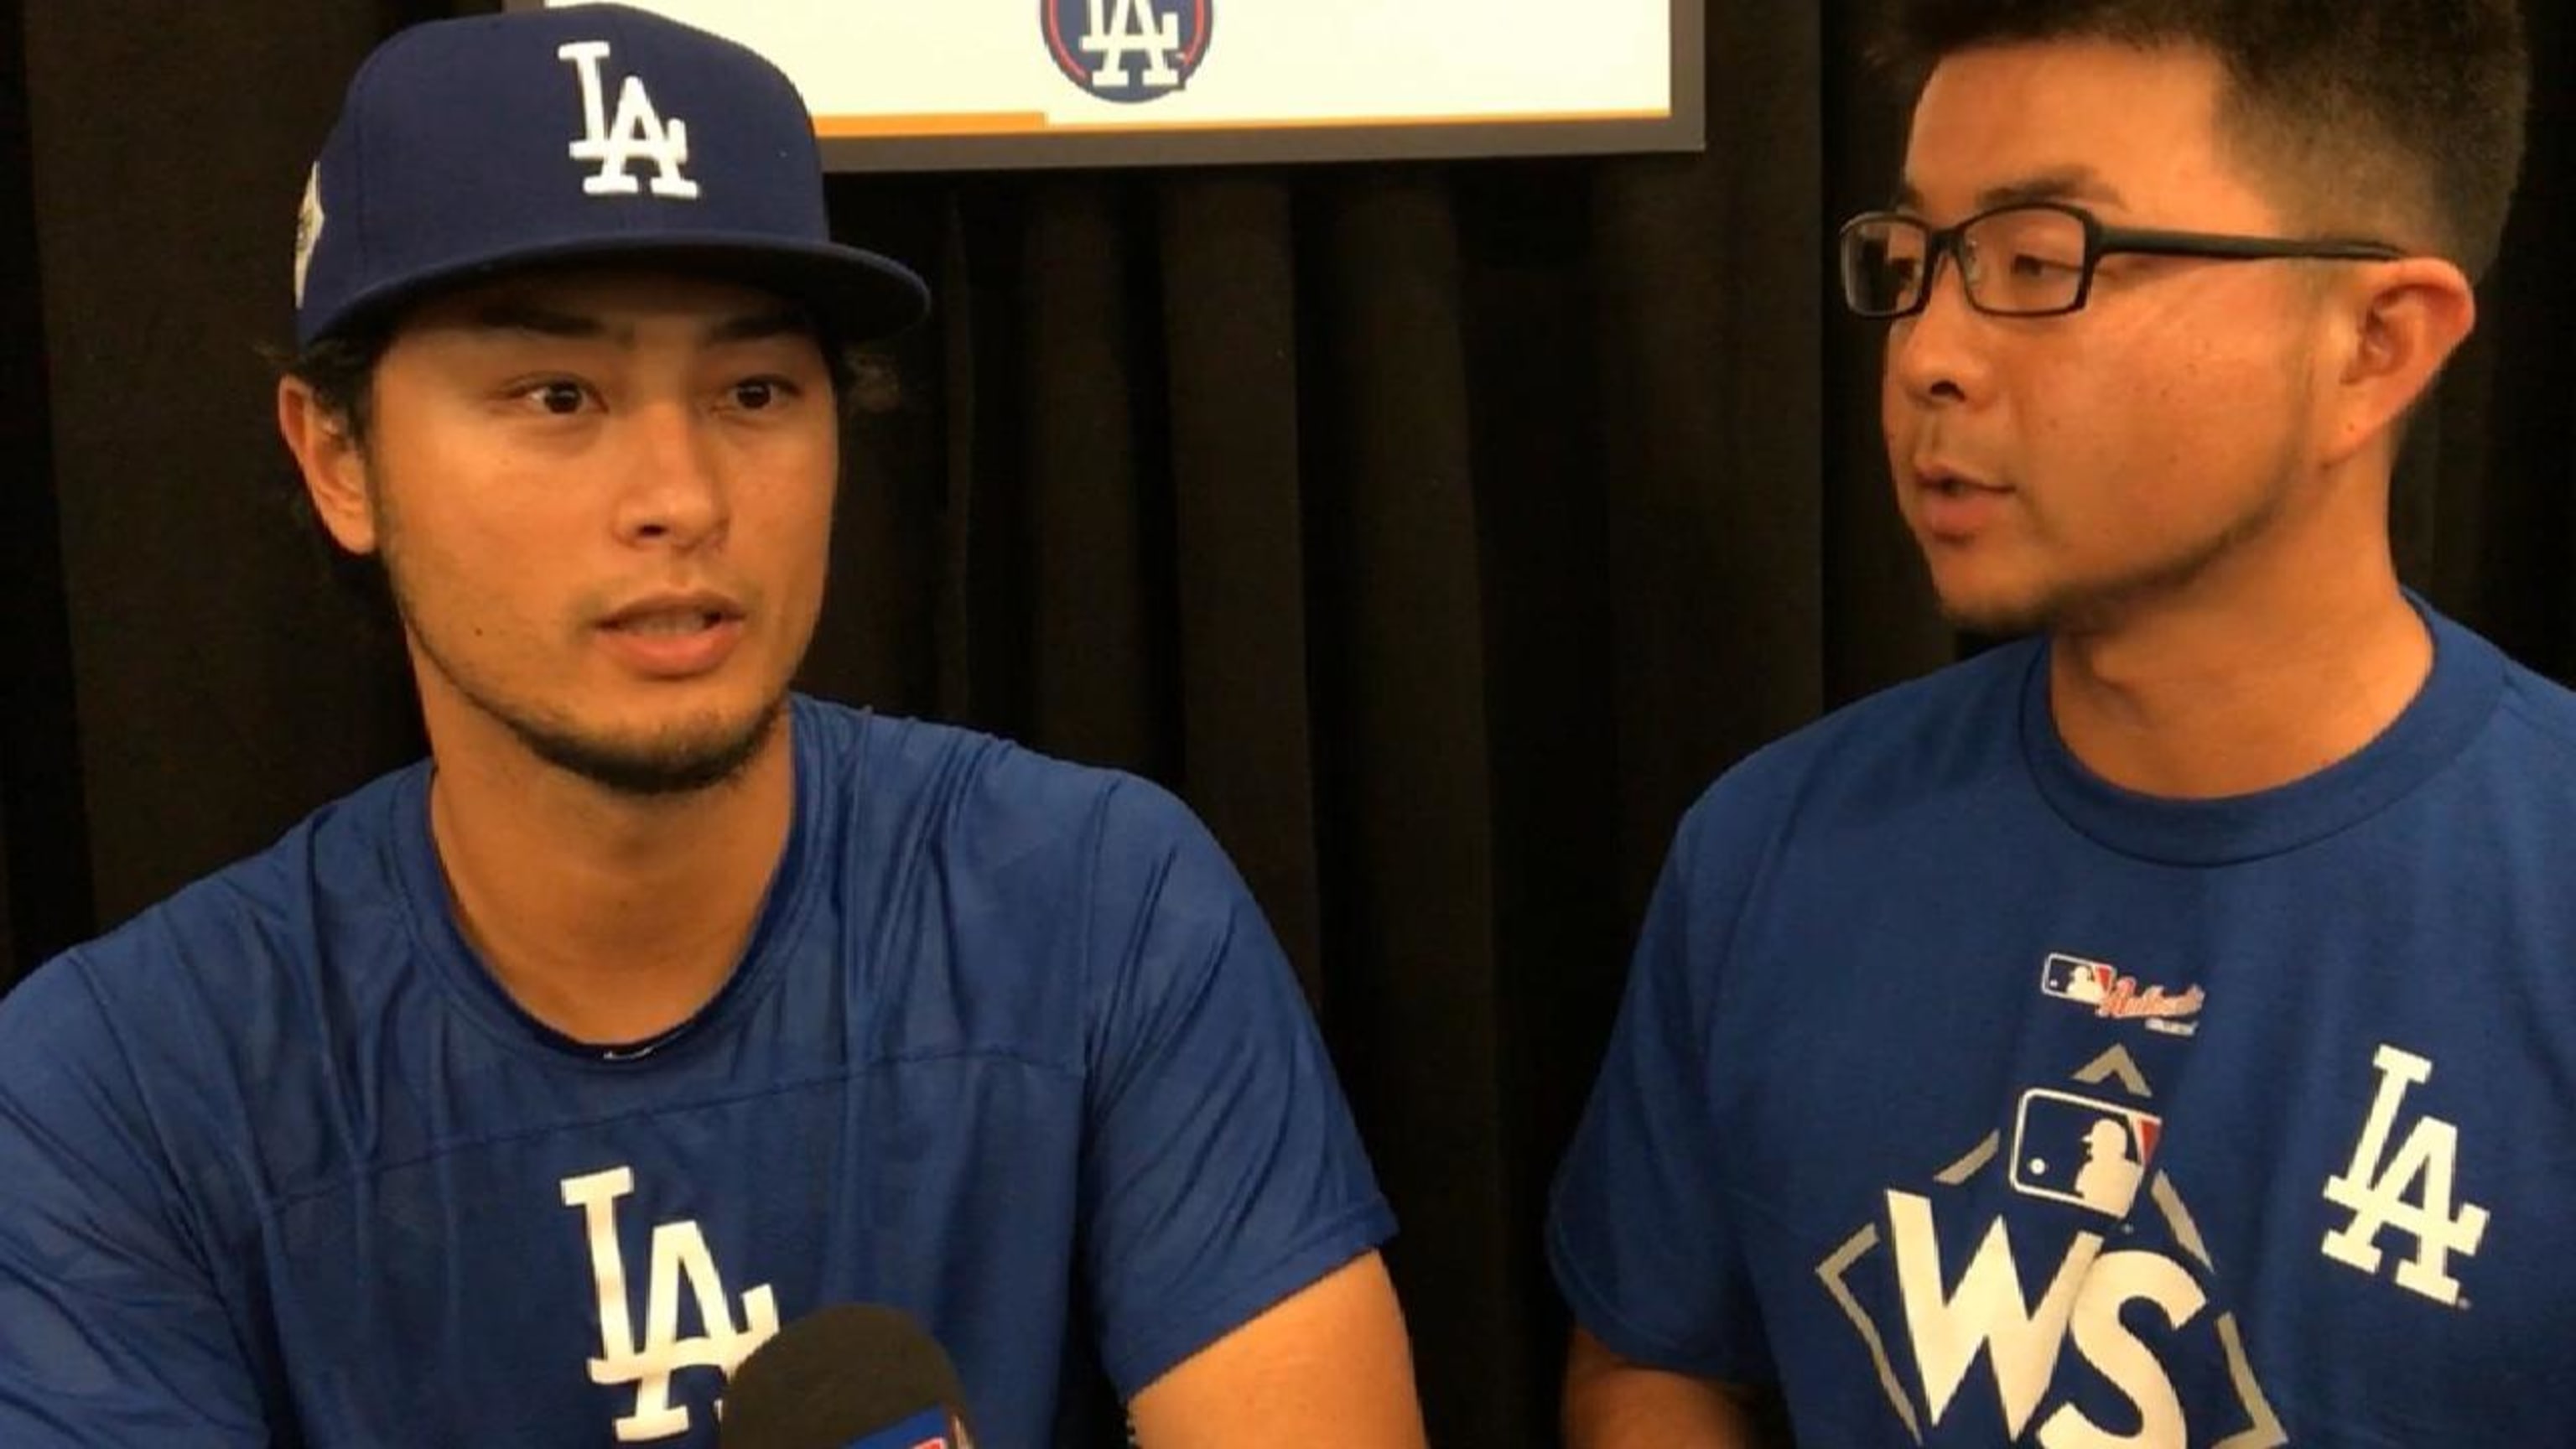 Meet the Players: Get to know the Dodgers